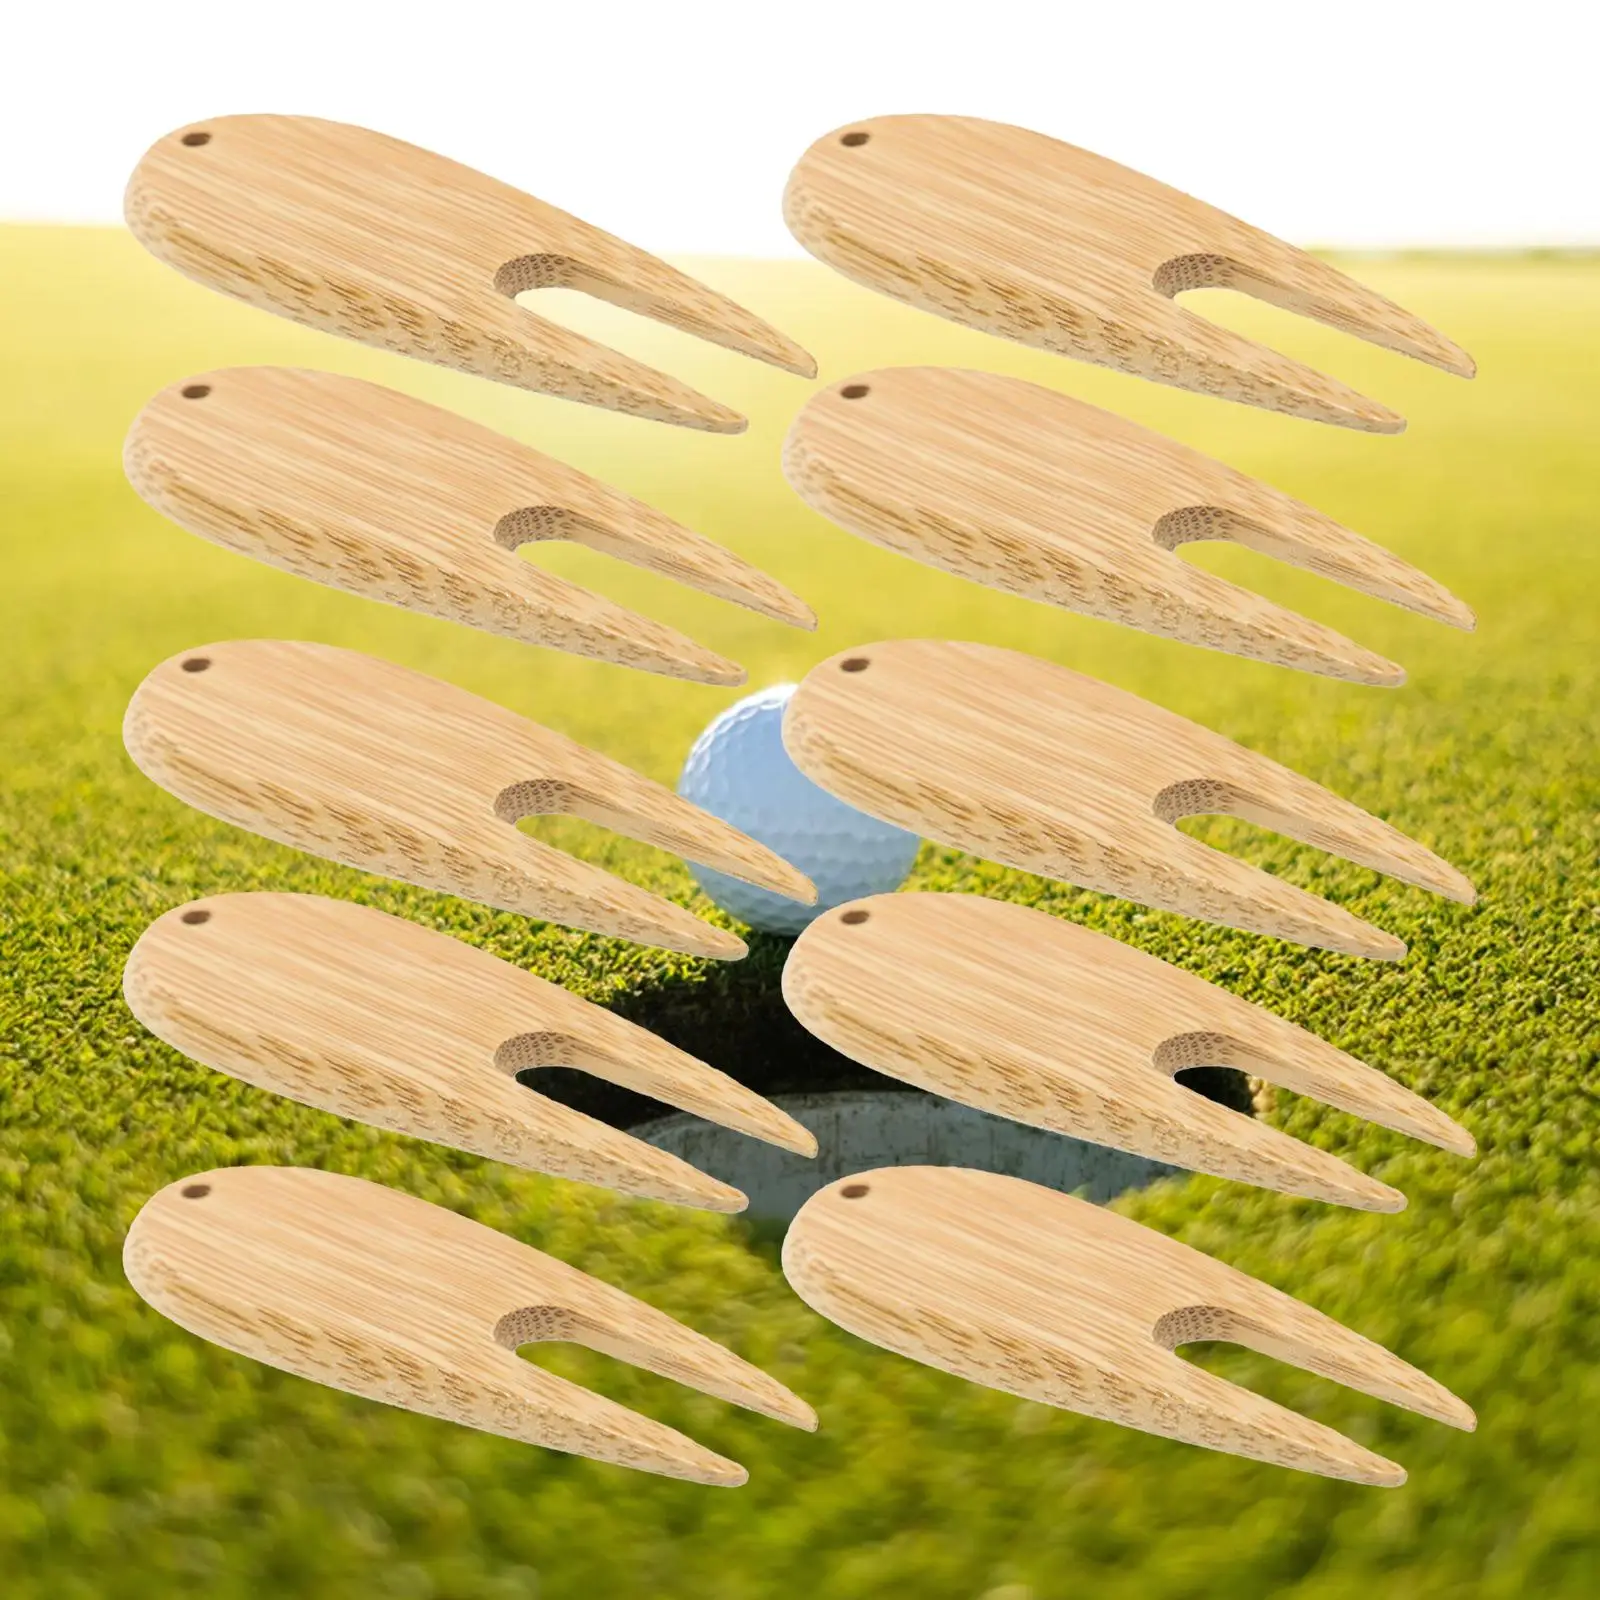 10Pcs Professional Golf Divot Repair Tools Multi-Use Wear Resistant Lightweight Non-Slip Golf Pitch Fork for Men Putting Green